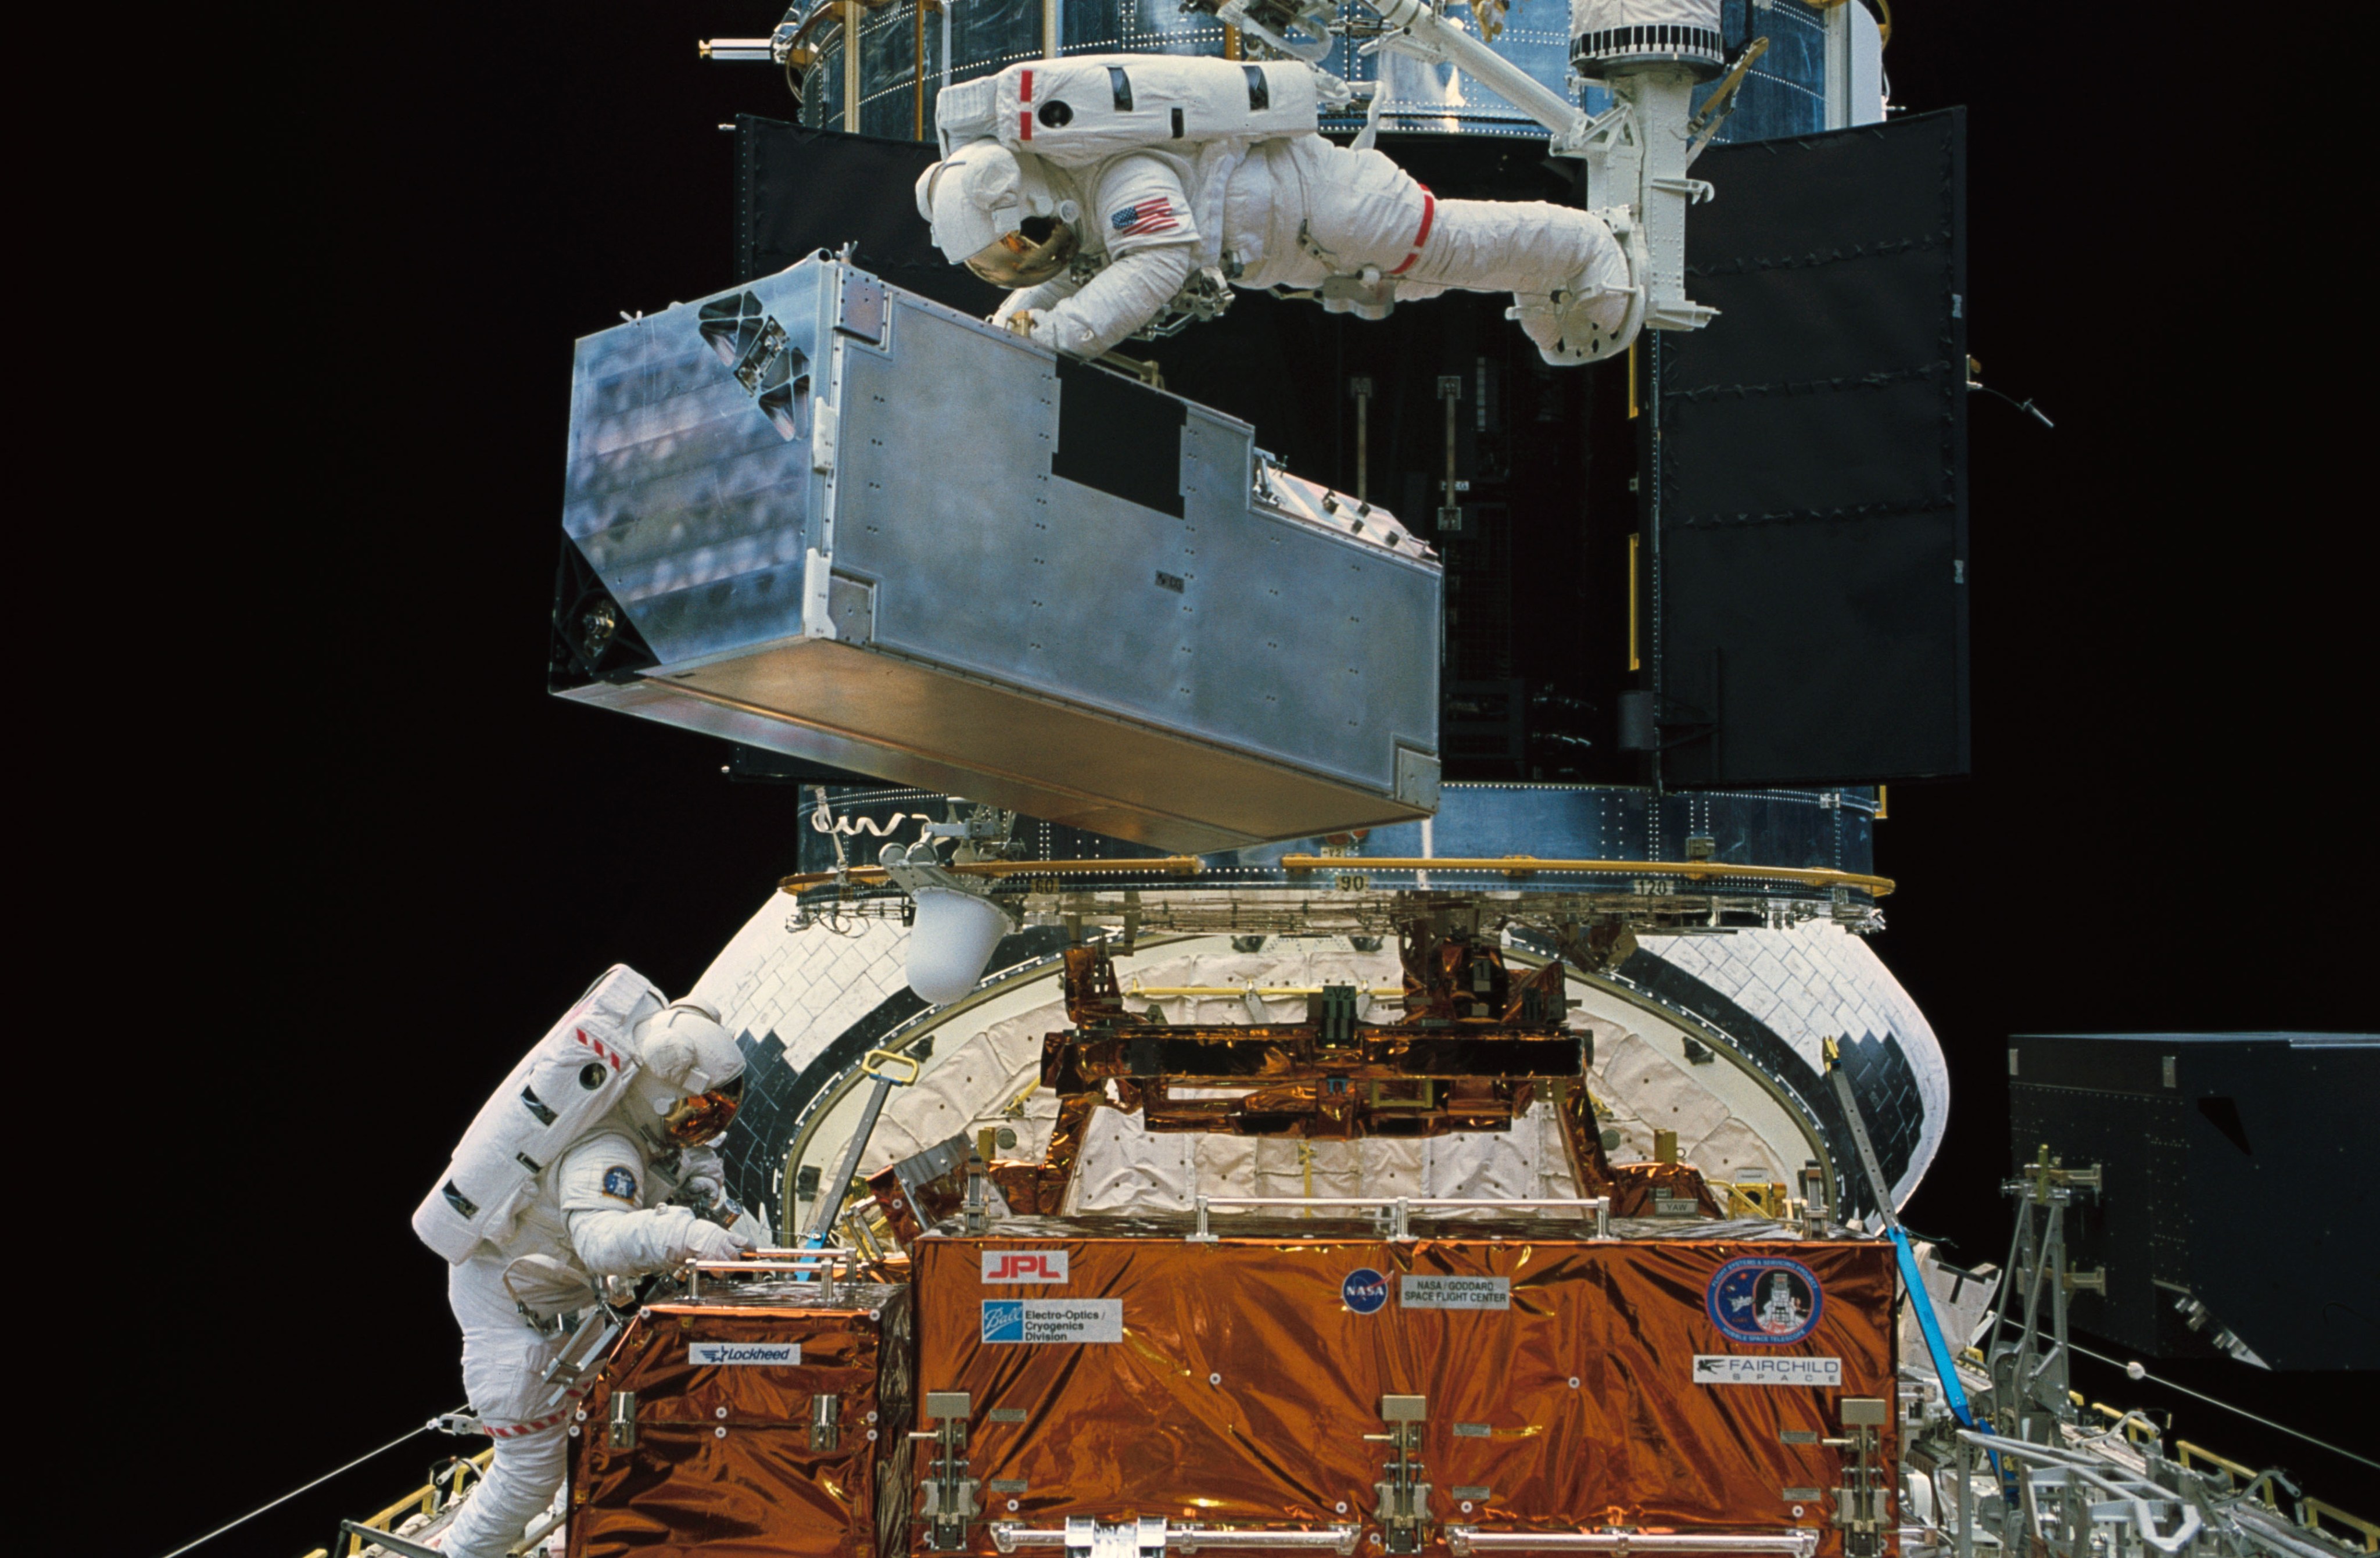 An astronaut on the robotic arm of the shuttle carries the COSTAR instrument for installation whil another works in the cargo bay.